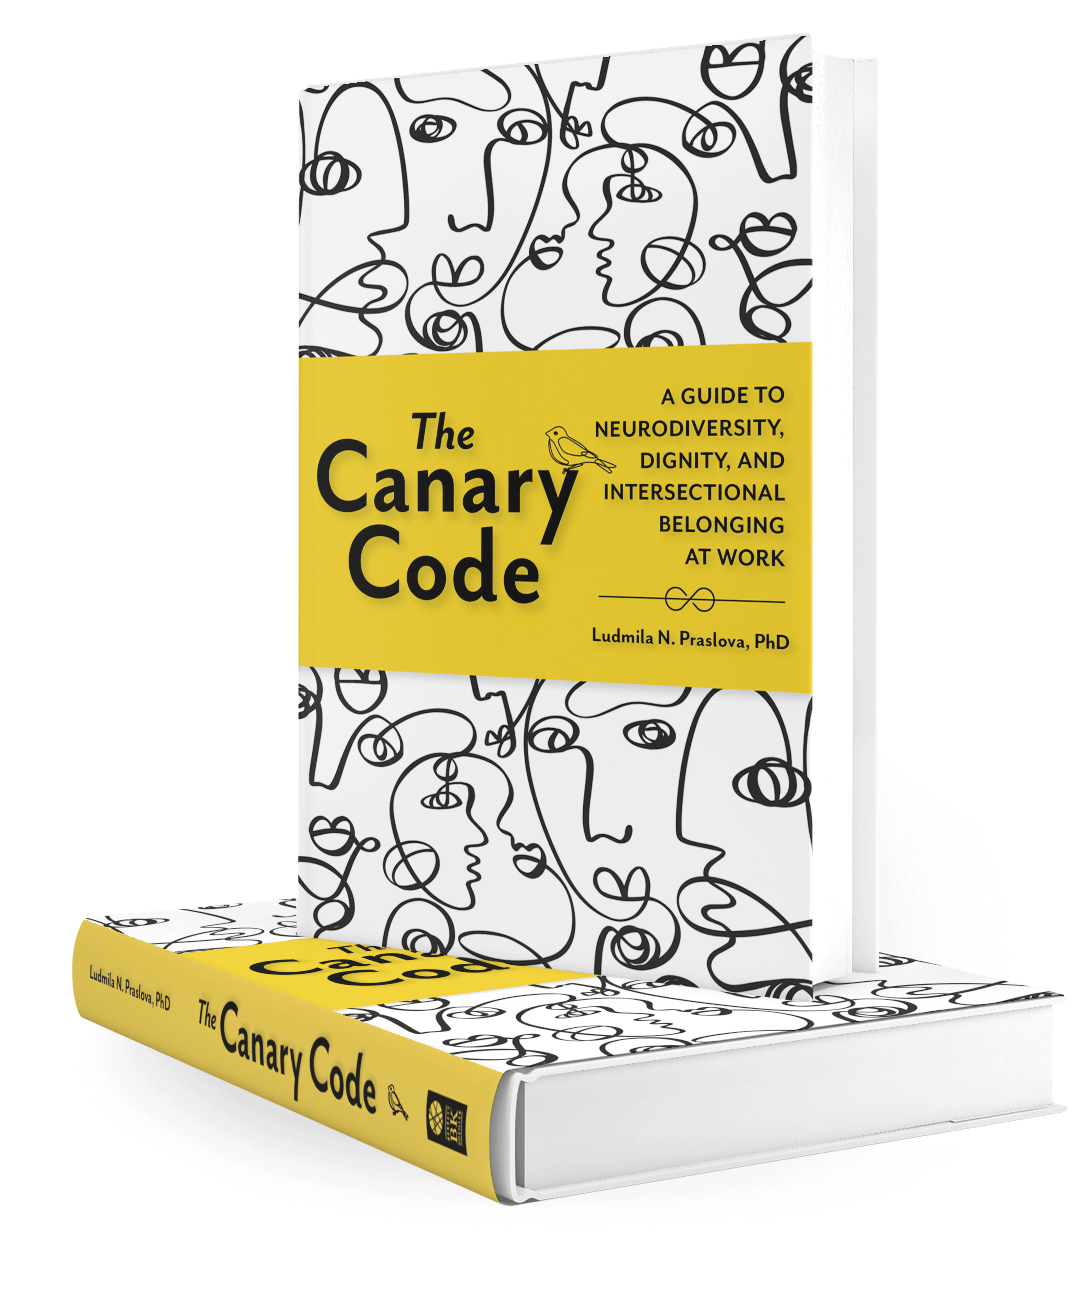 The Canary Code: A Guide to Neurodiversity, Dignity, and Intersectional Belonging at Work by Ludmila N. Praslova, PhD